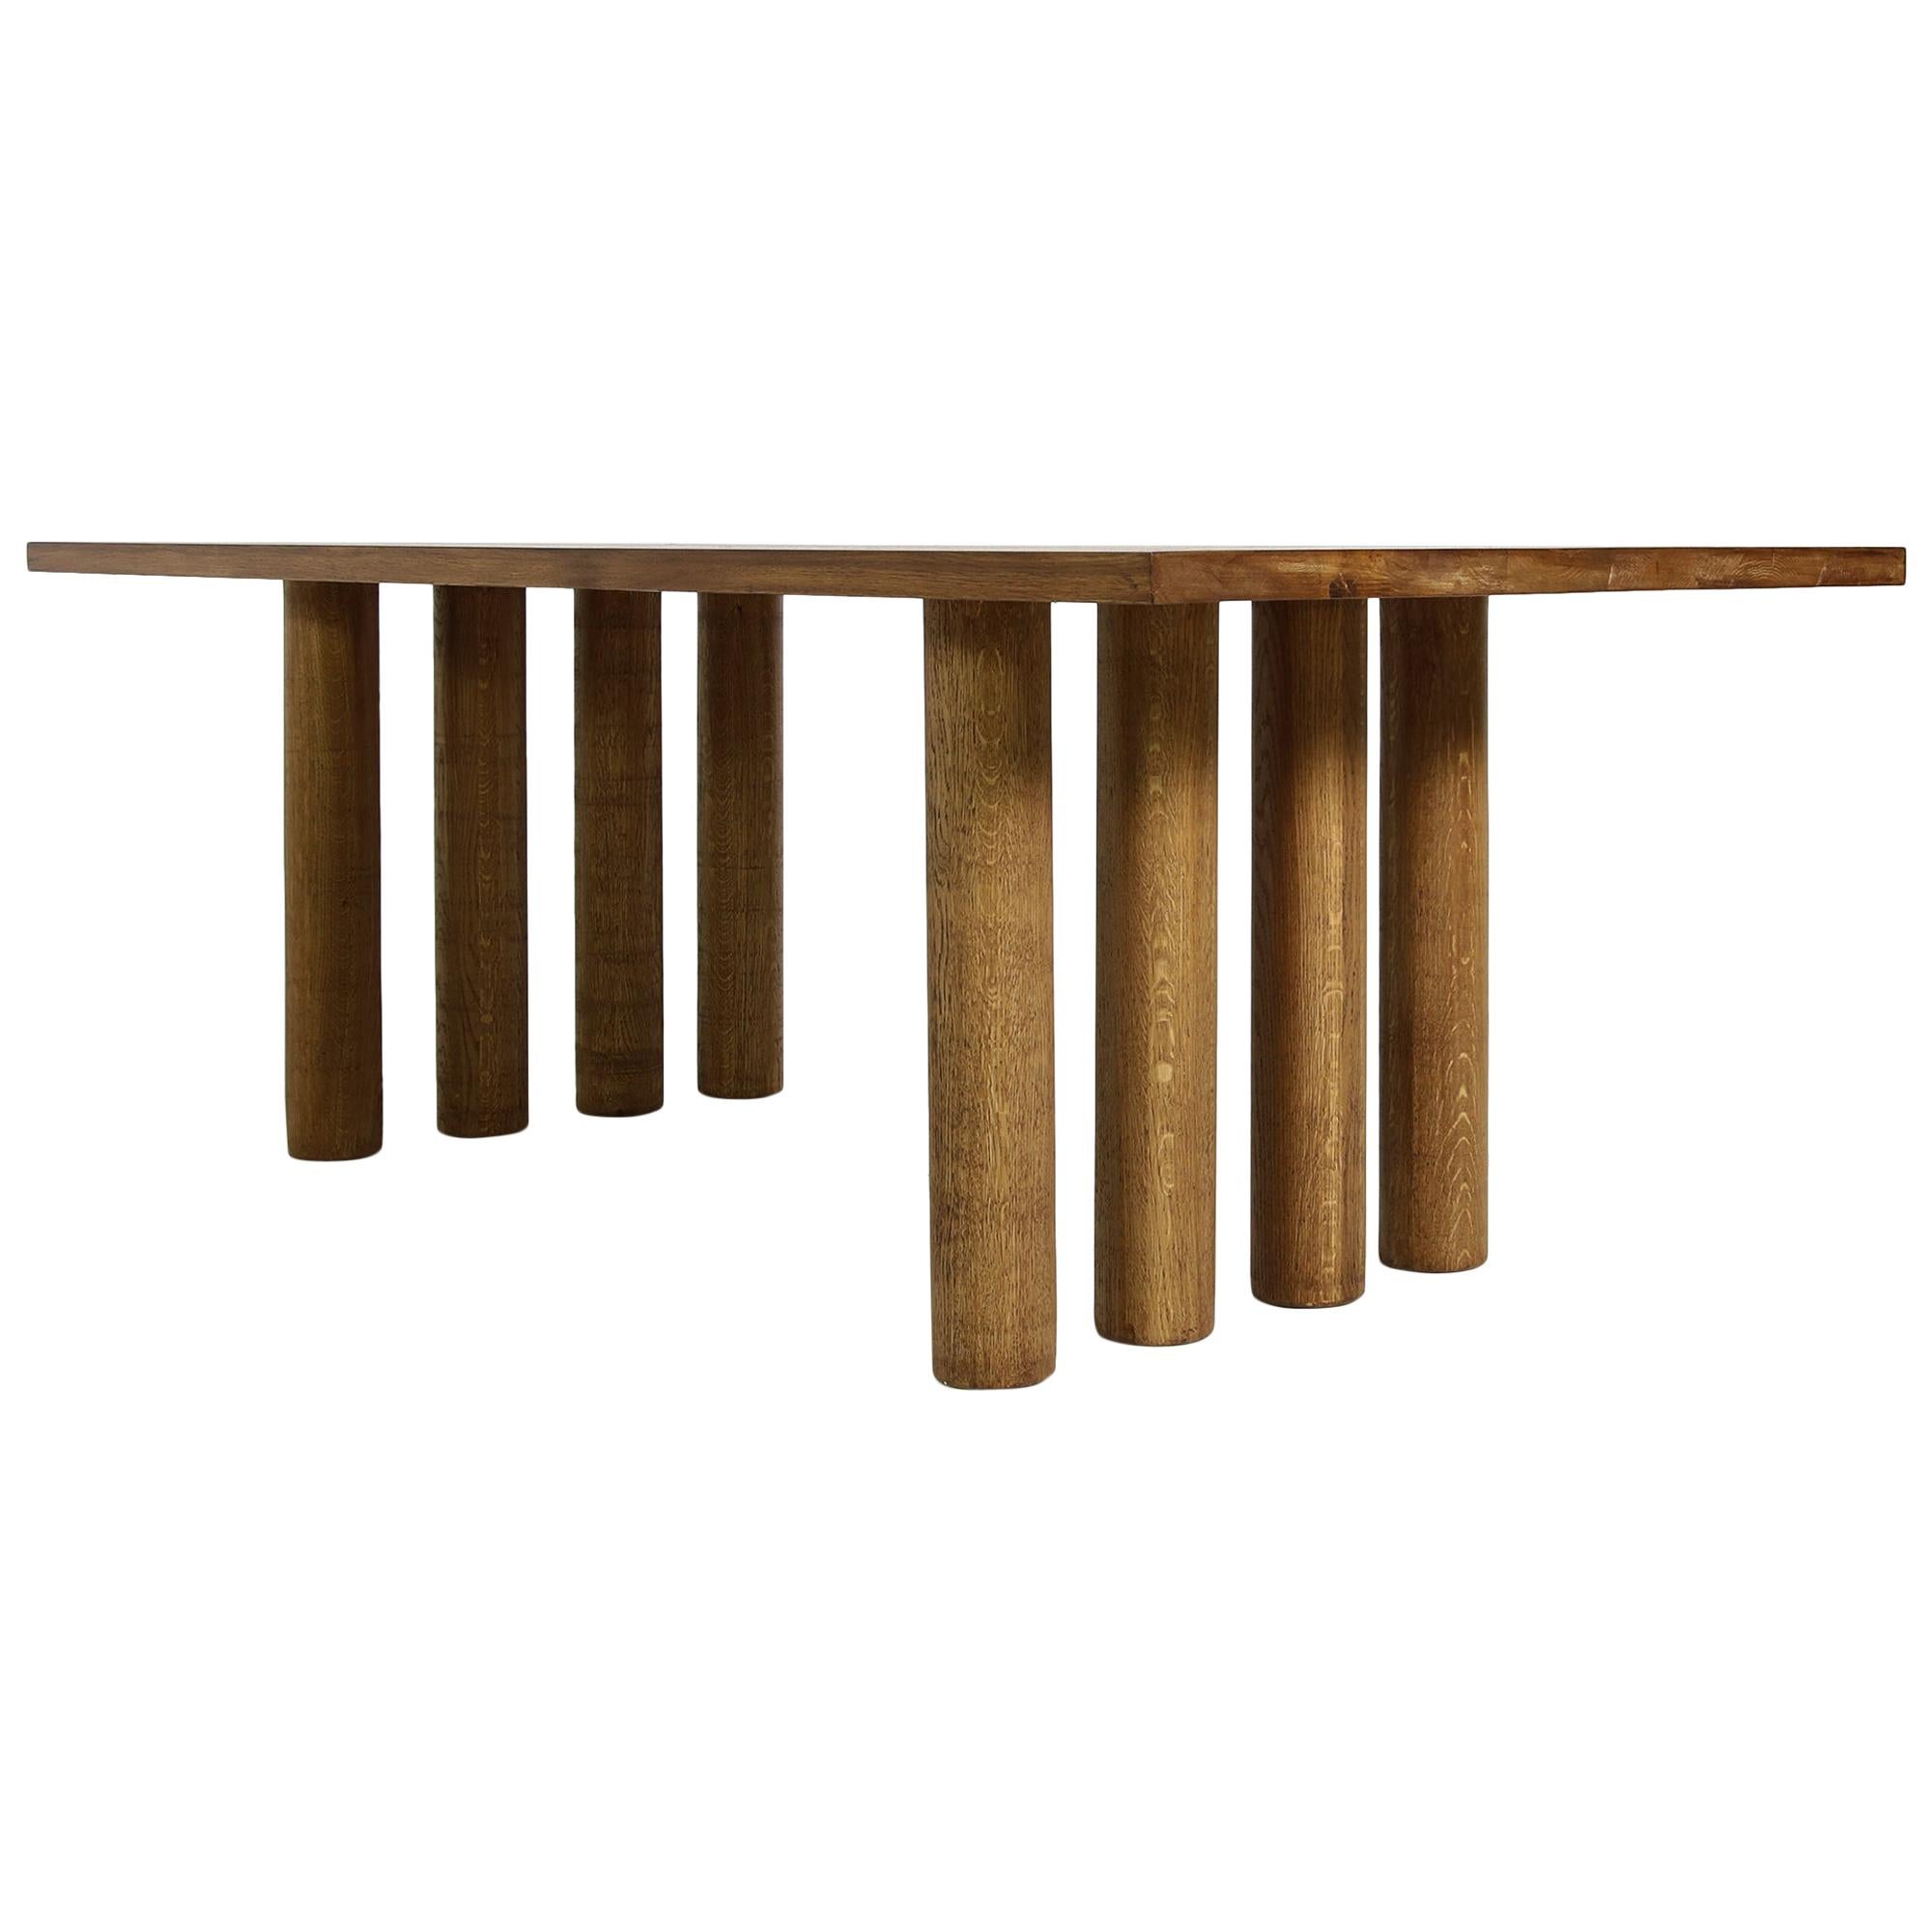 Beautiful contemporary Nathan Lindberg table, heavyweight. This piece can be used as a dining table for 6-12 persons (depends on the size) or as a conference table, or even a large free standing desk.
Beautiful rectangular, simple and minimalist